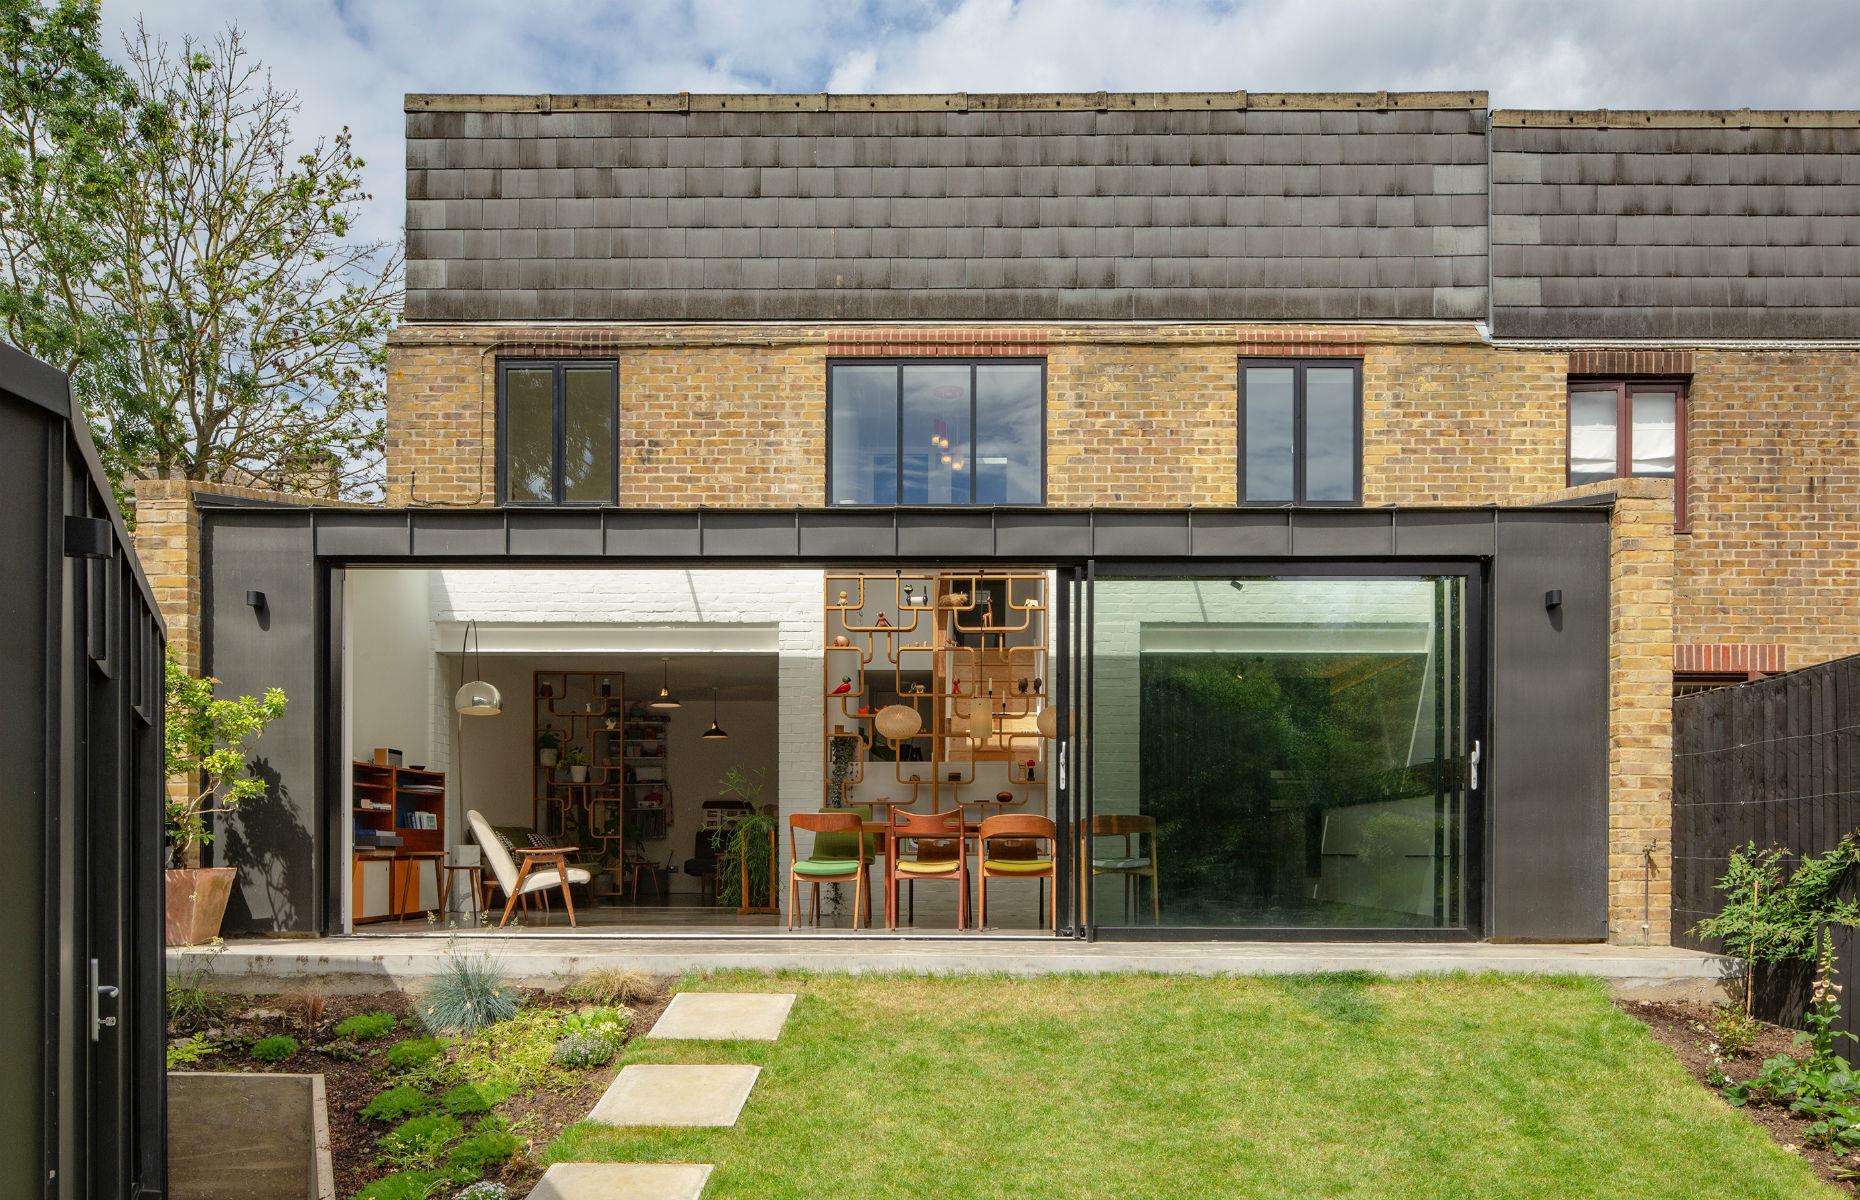 This sensitive extension was shortlisted for 2019's Don't Move, Improve! awards. Image: Ulla Gala Architects